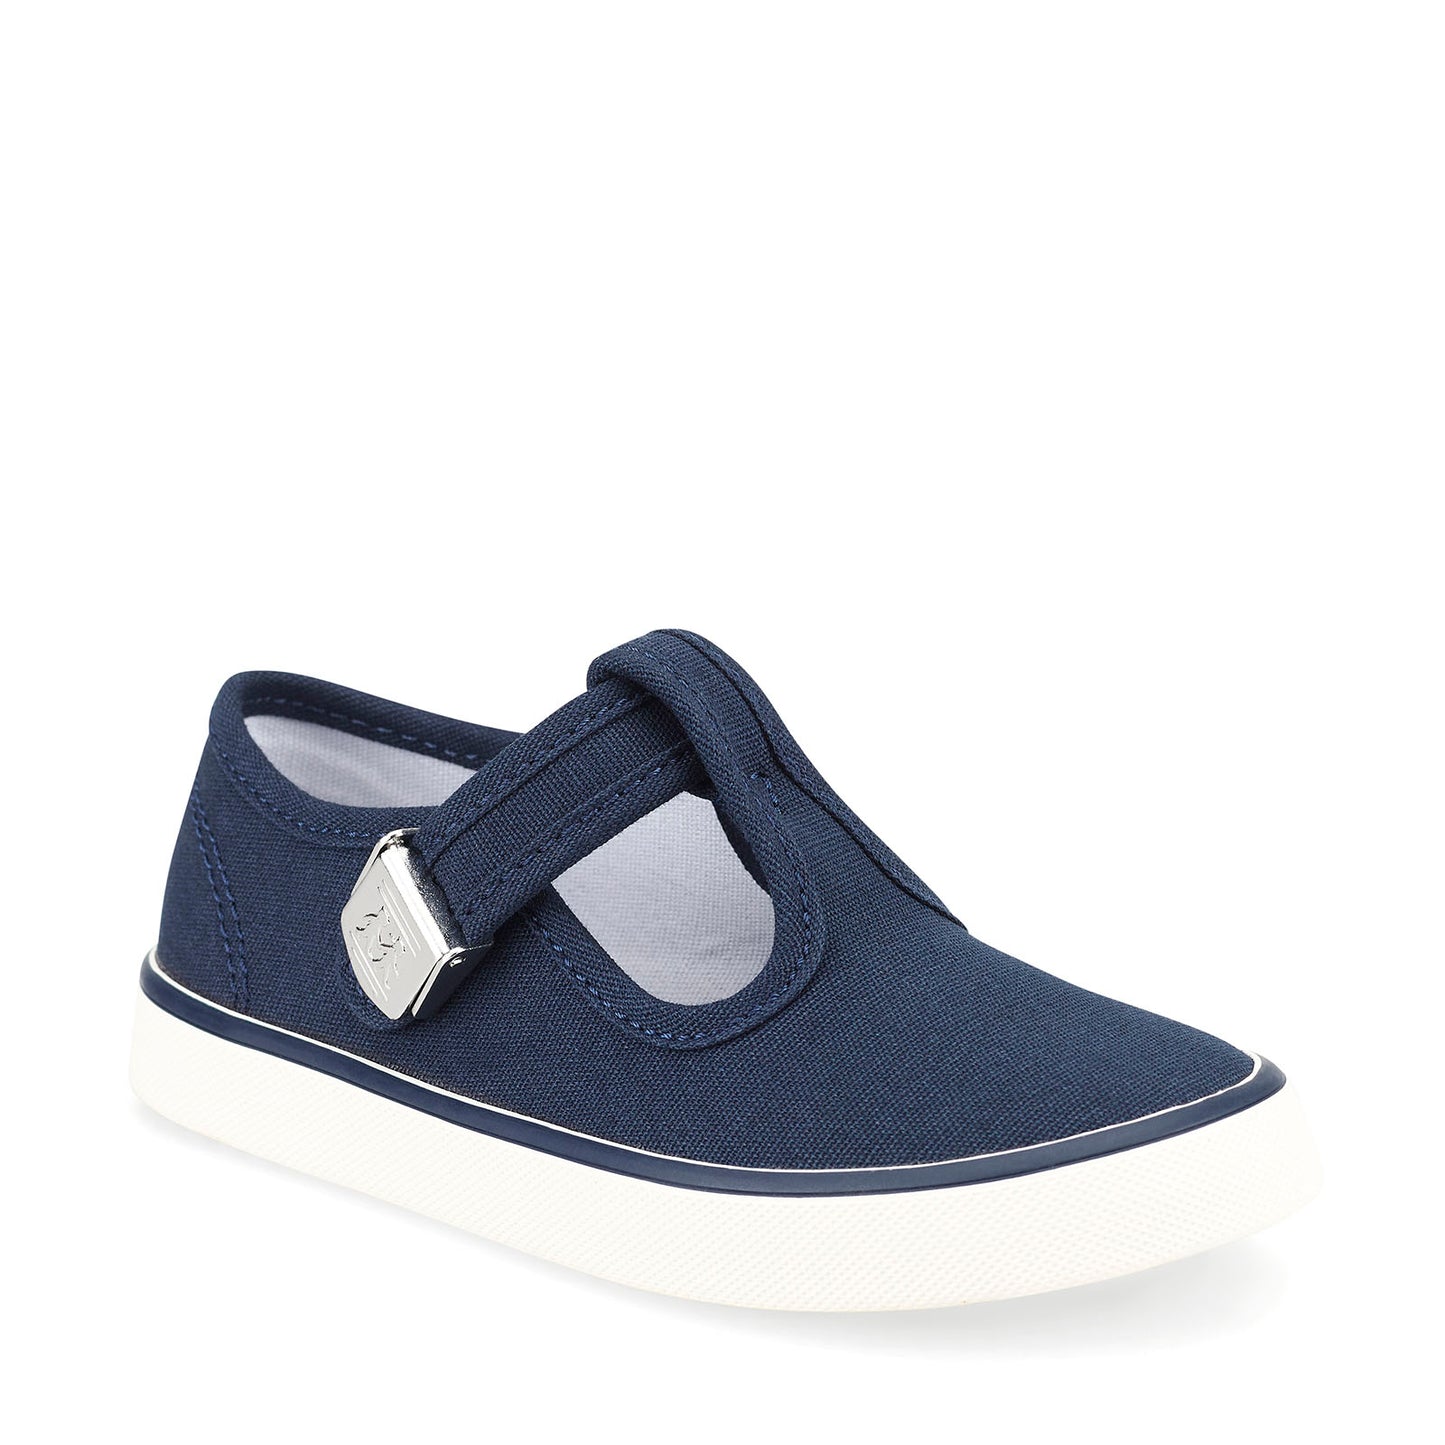 StartRite TREASURE Canvas Shoes (Navy)  20-27.5